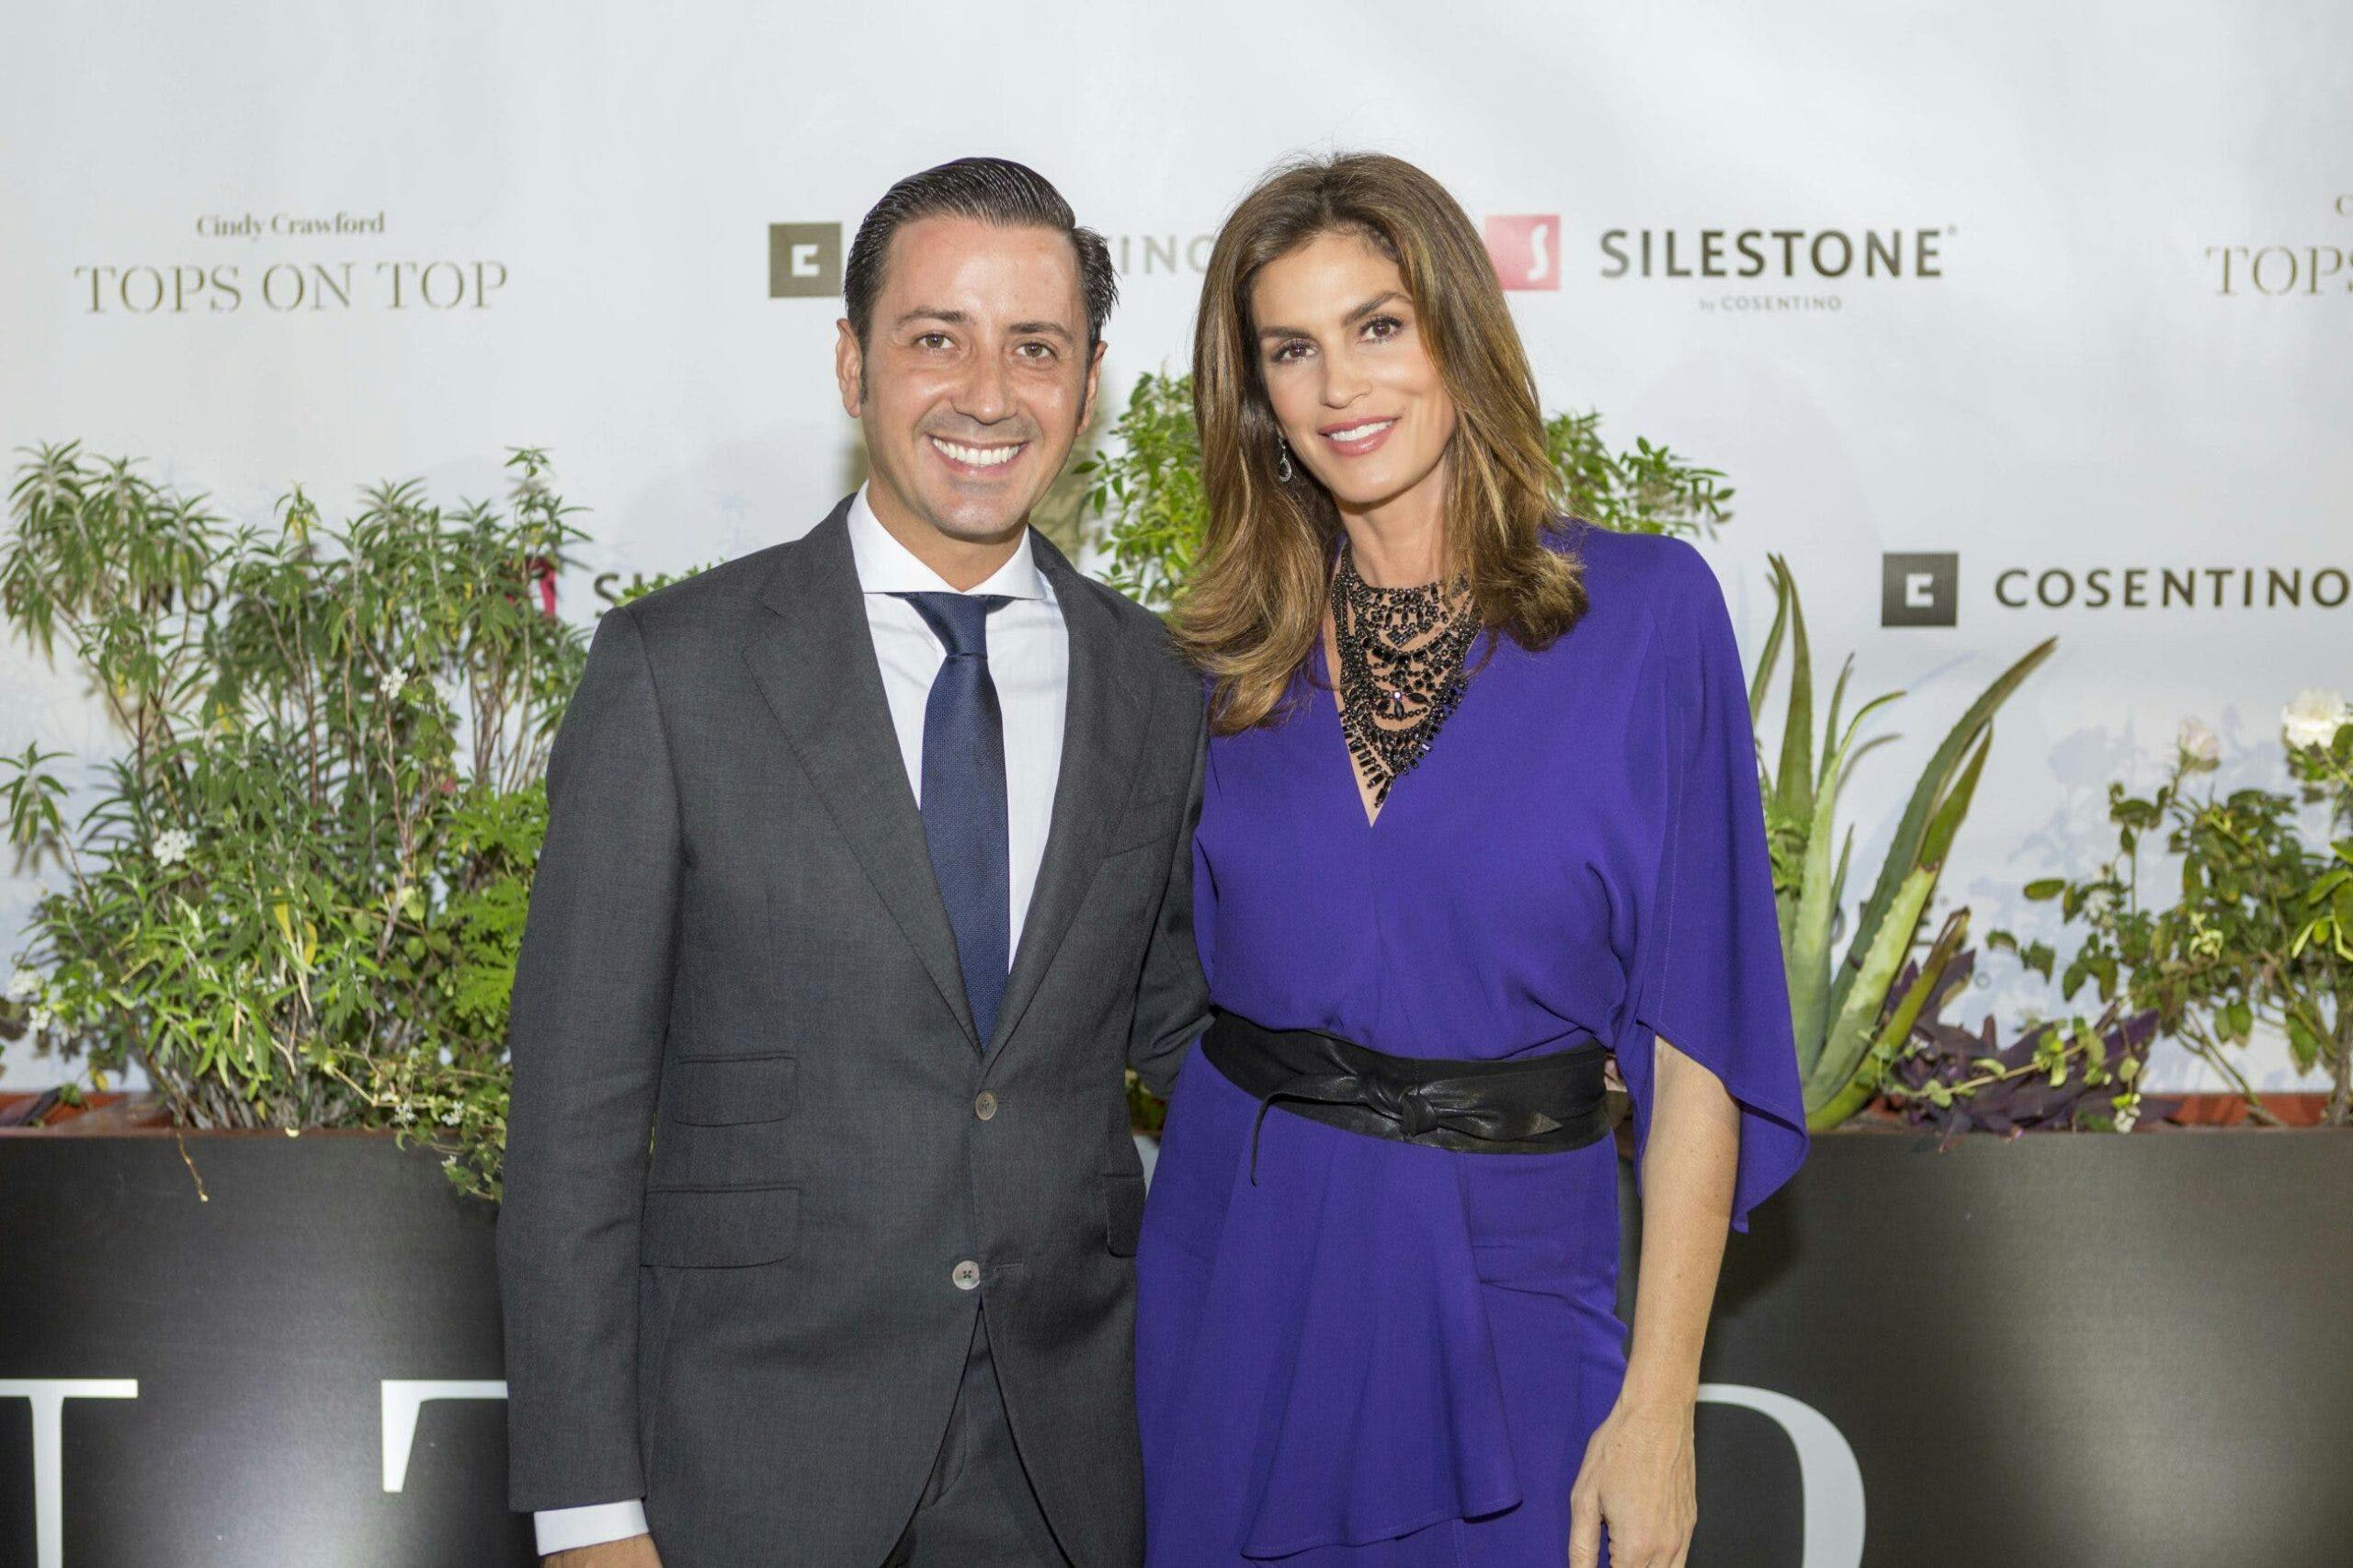 Image 31 of Cindy Crawford Cosentino 3 prensa 1 1 scaled in Cindy Crawford and "Tops on Top" by Silestone® in Houston - Cosentino